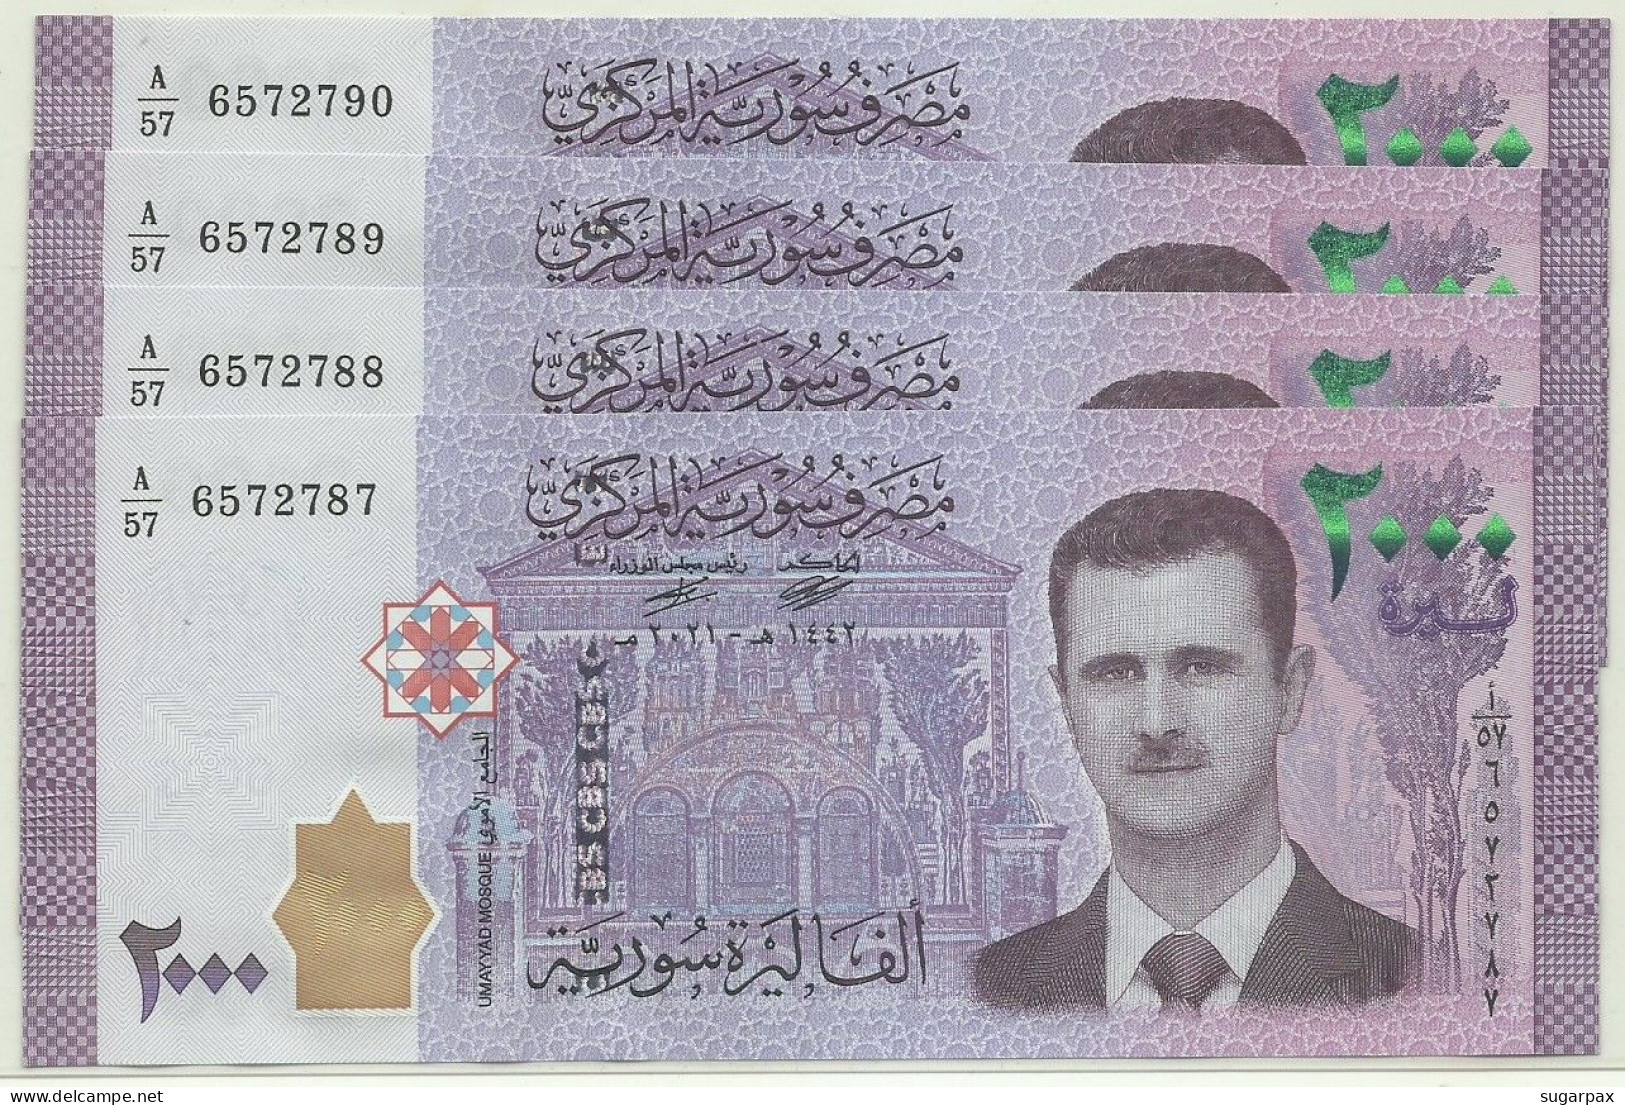 Syria - 4 X 2000 Syrian Pounds - 2021 / AH 1442 - Pick 117.NEW - Unc. - Serie A/57 - 2.000 - Syria